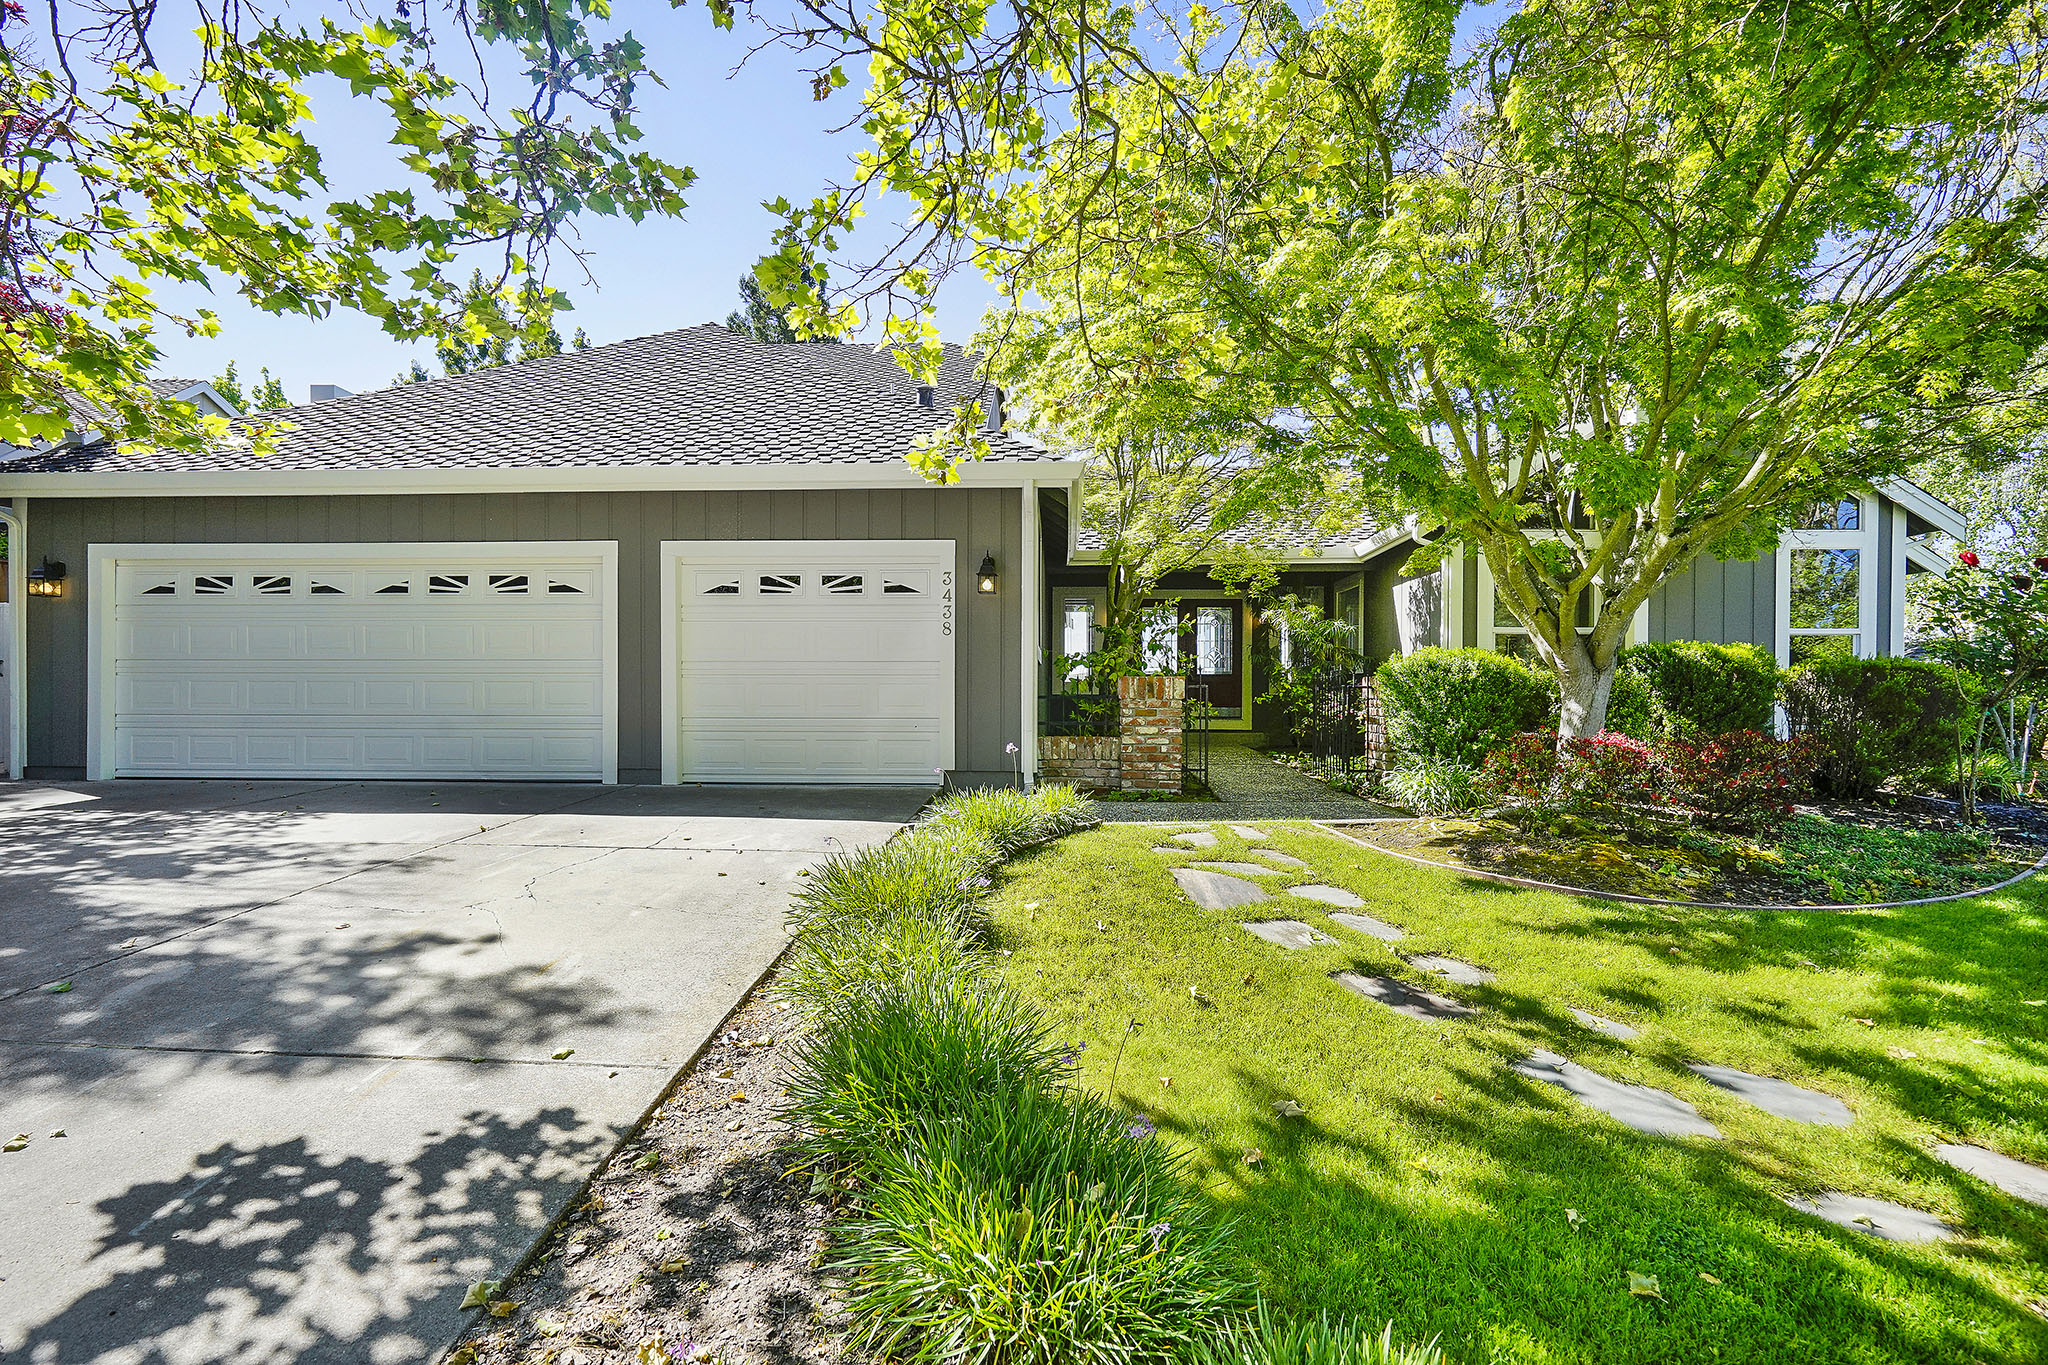 Image number 1 for slideshow of 3438 Silver Maple Drive Blackhawk Ca